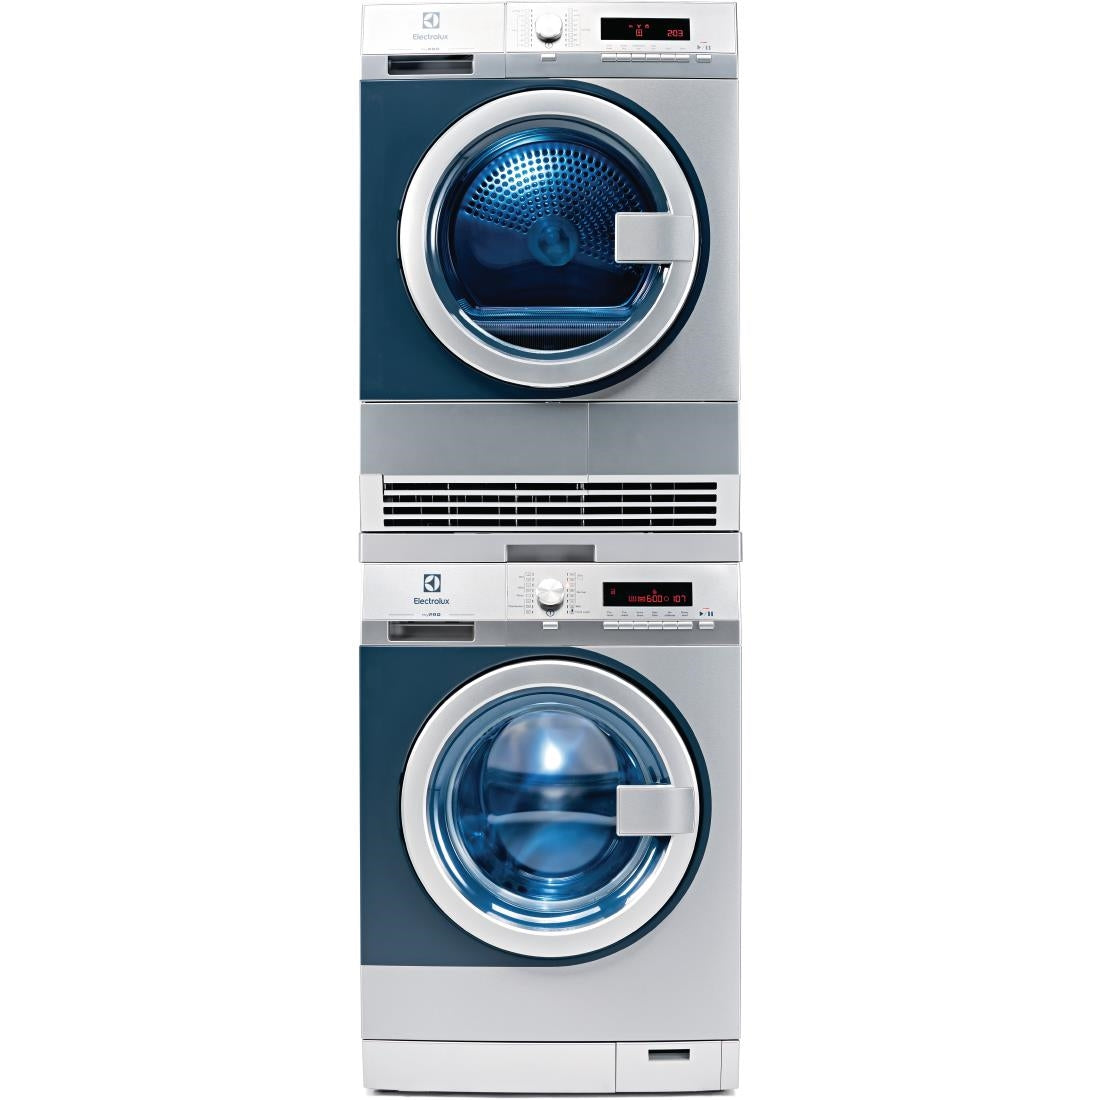 CK375 Electrolux myPRO Commercial Washing Machine WE170P With Pump